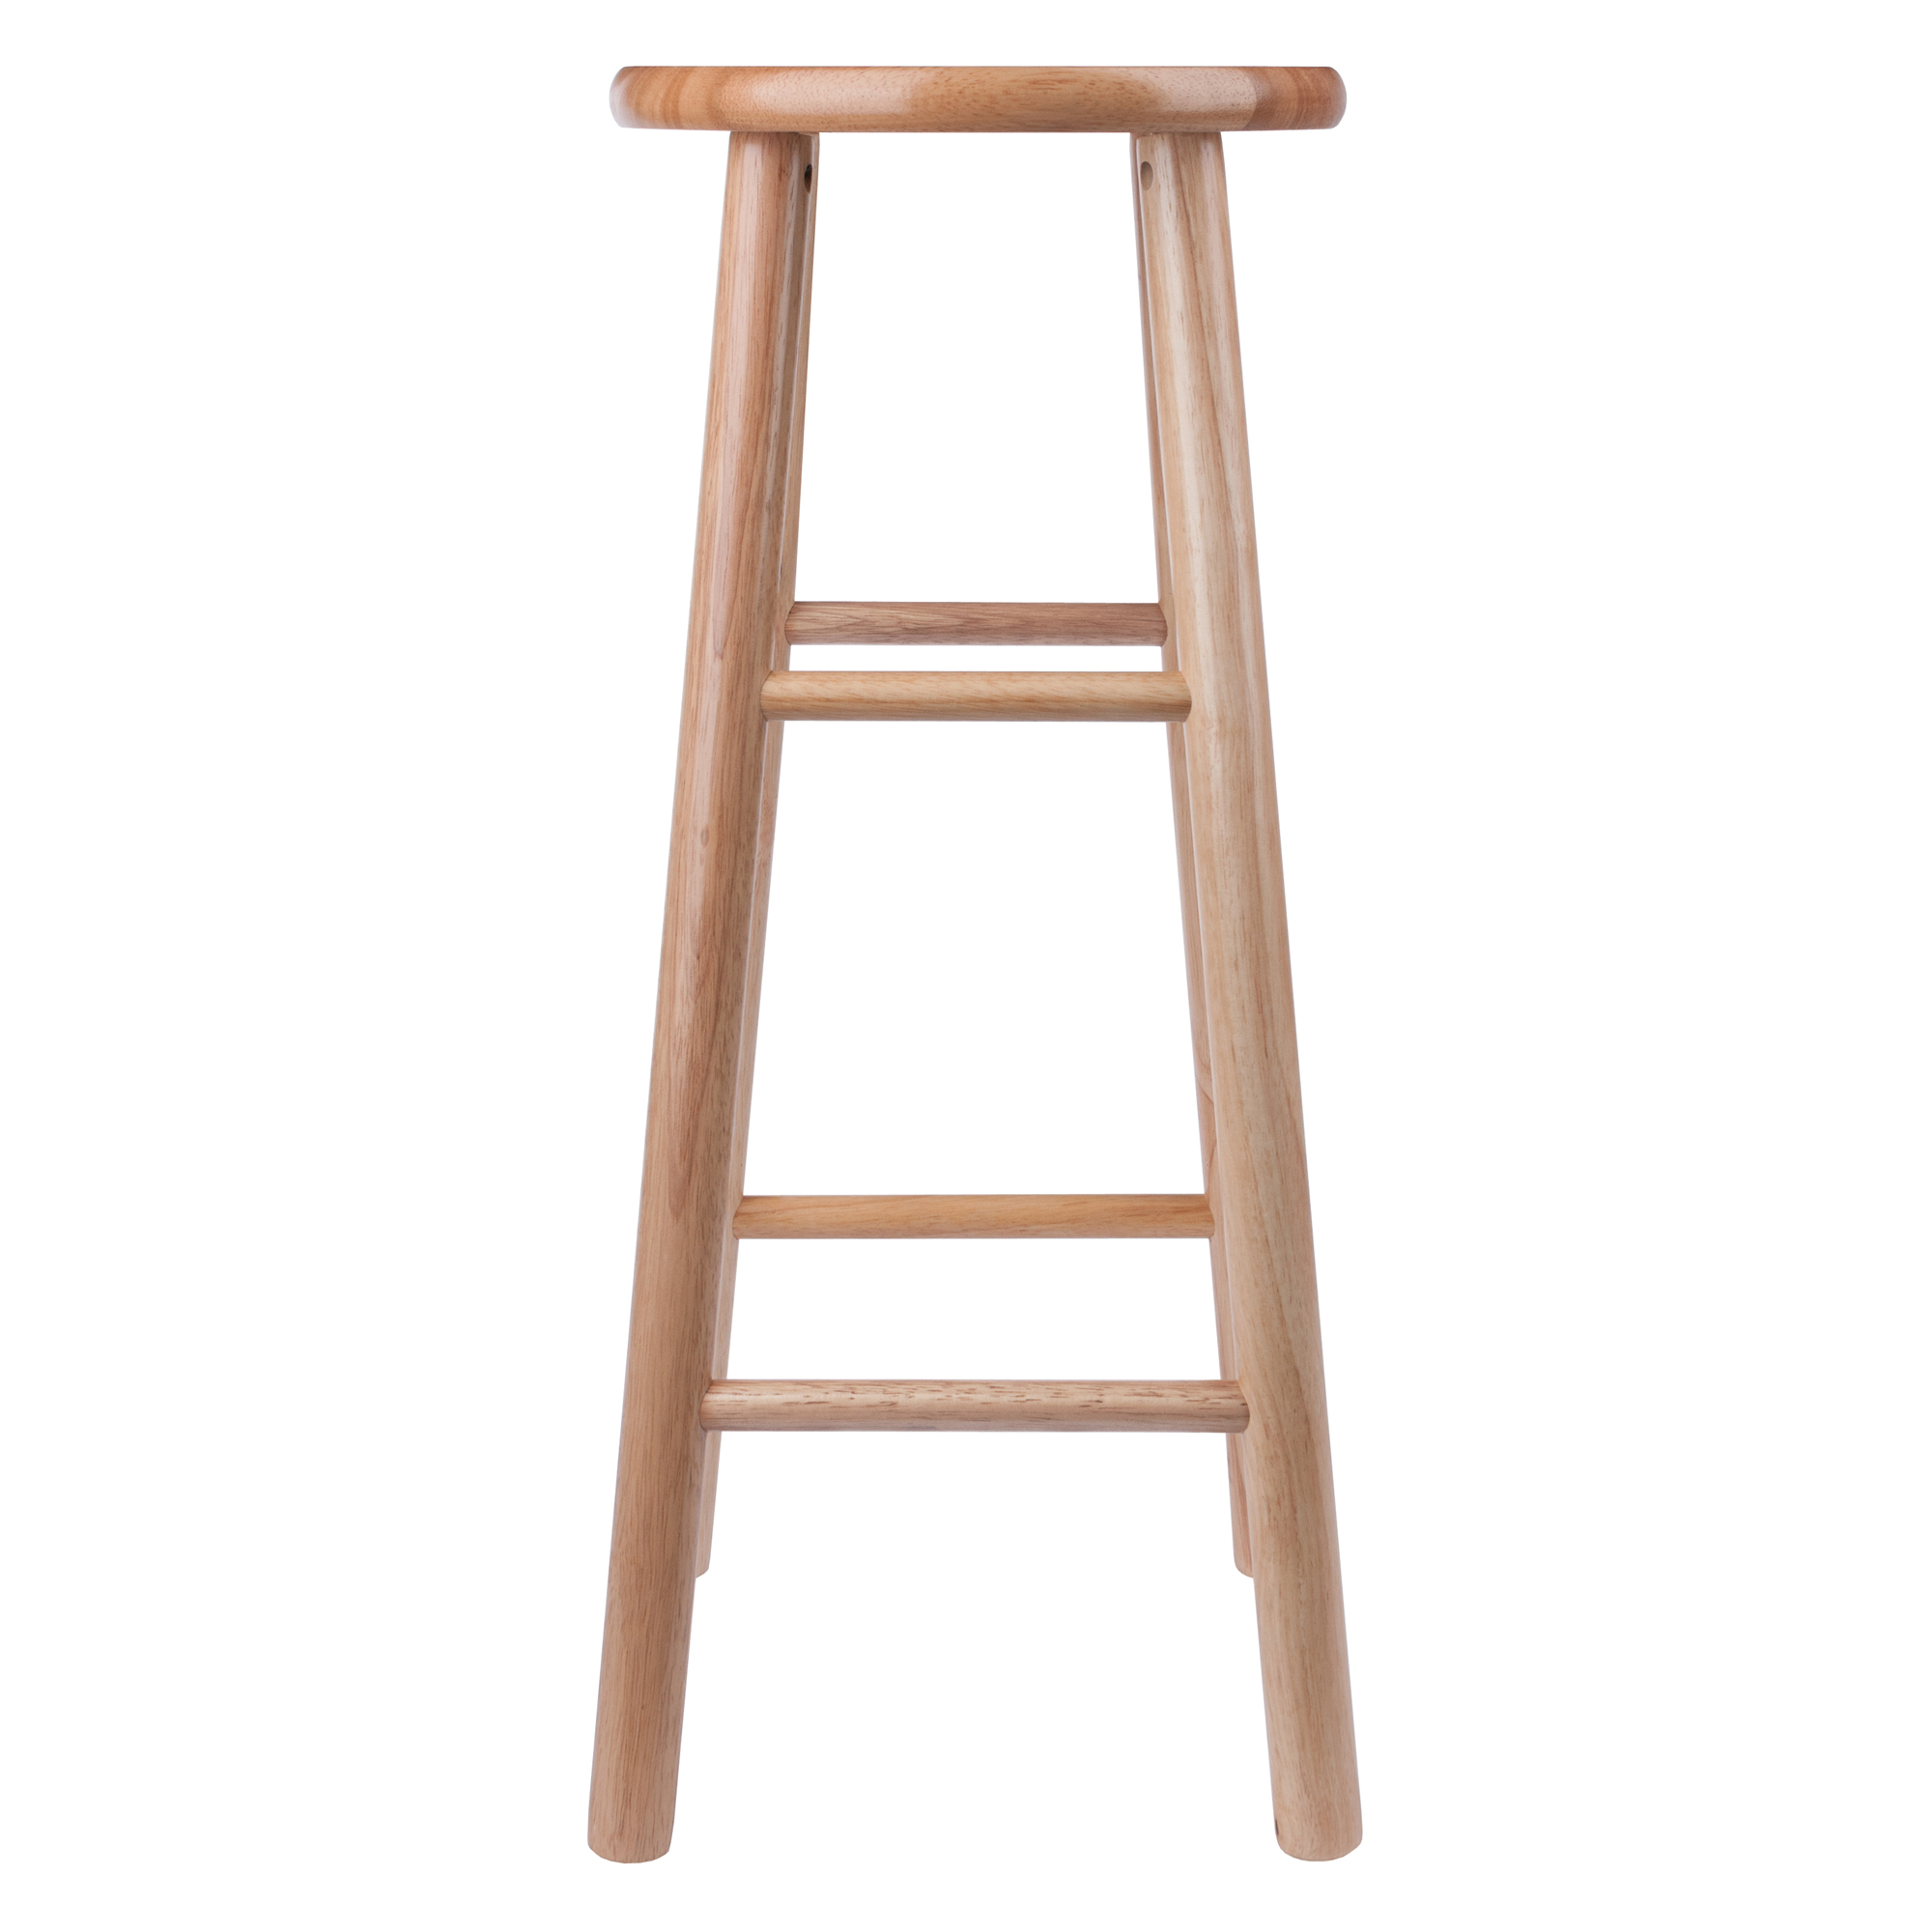 Winsome All Natural 30 in. Beveled Seat Bar Stools - Set of 2 - image 2 of 6